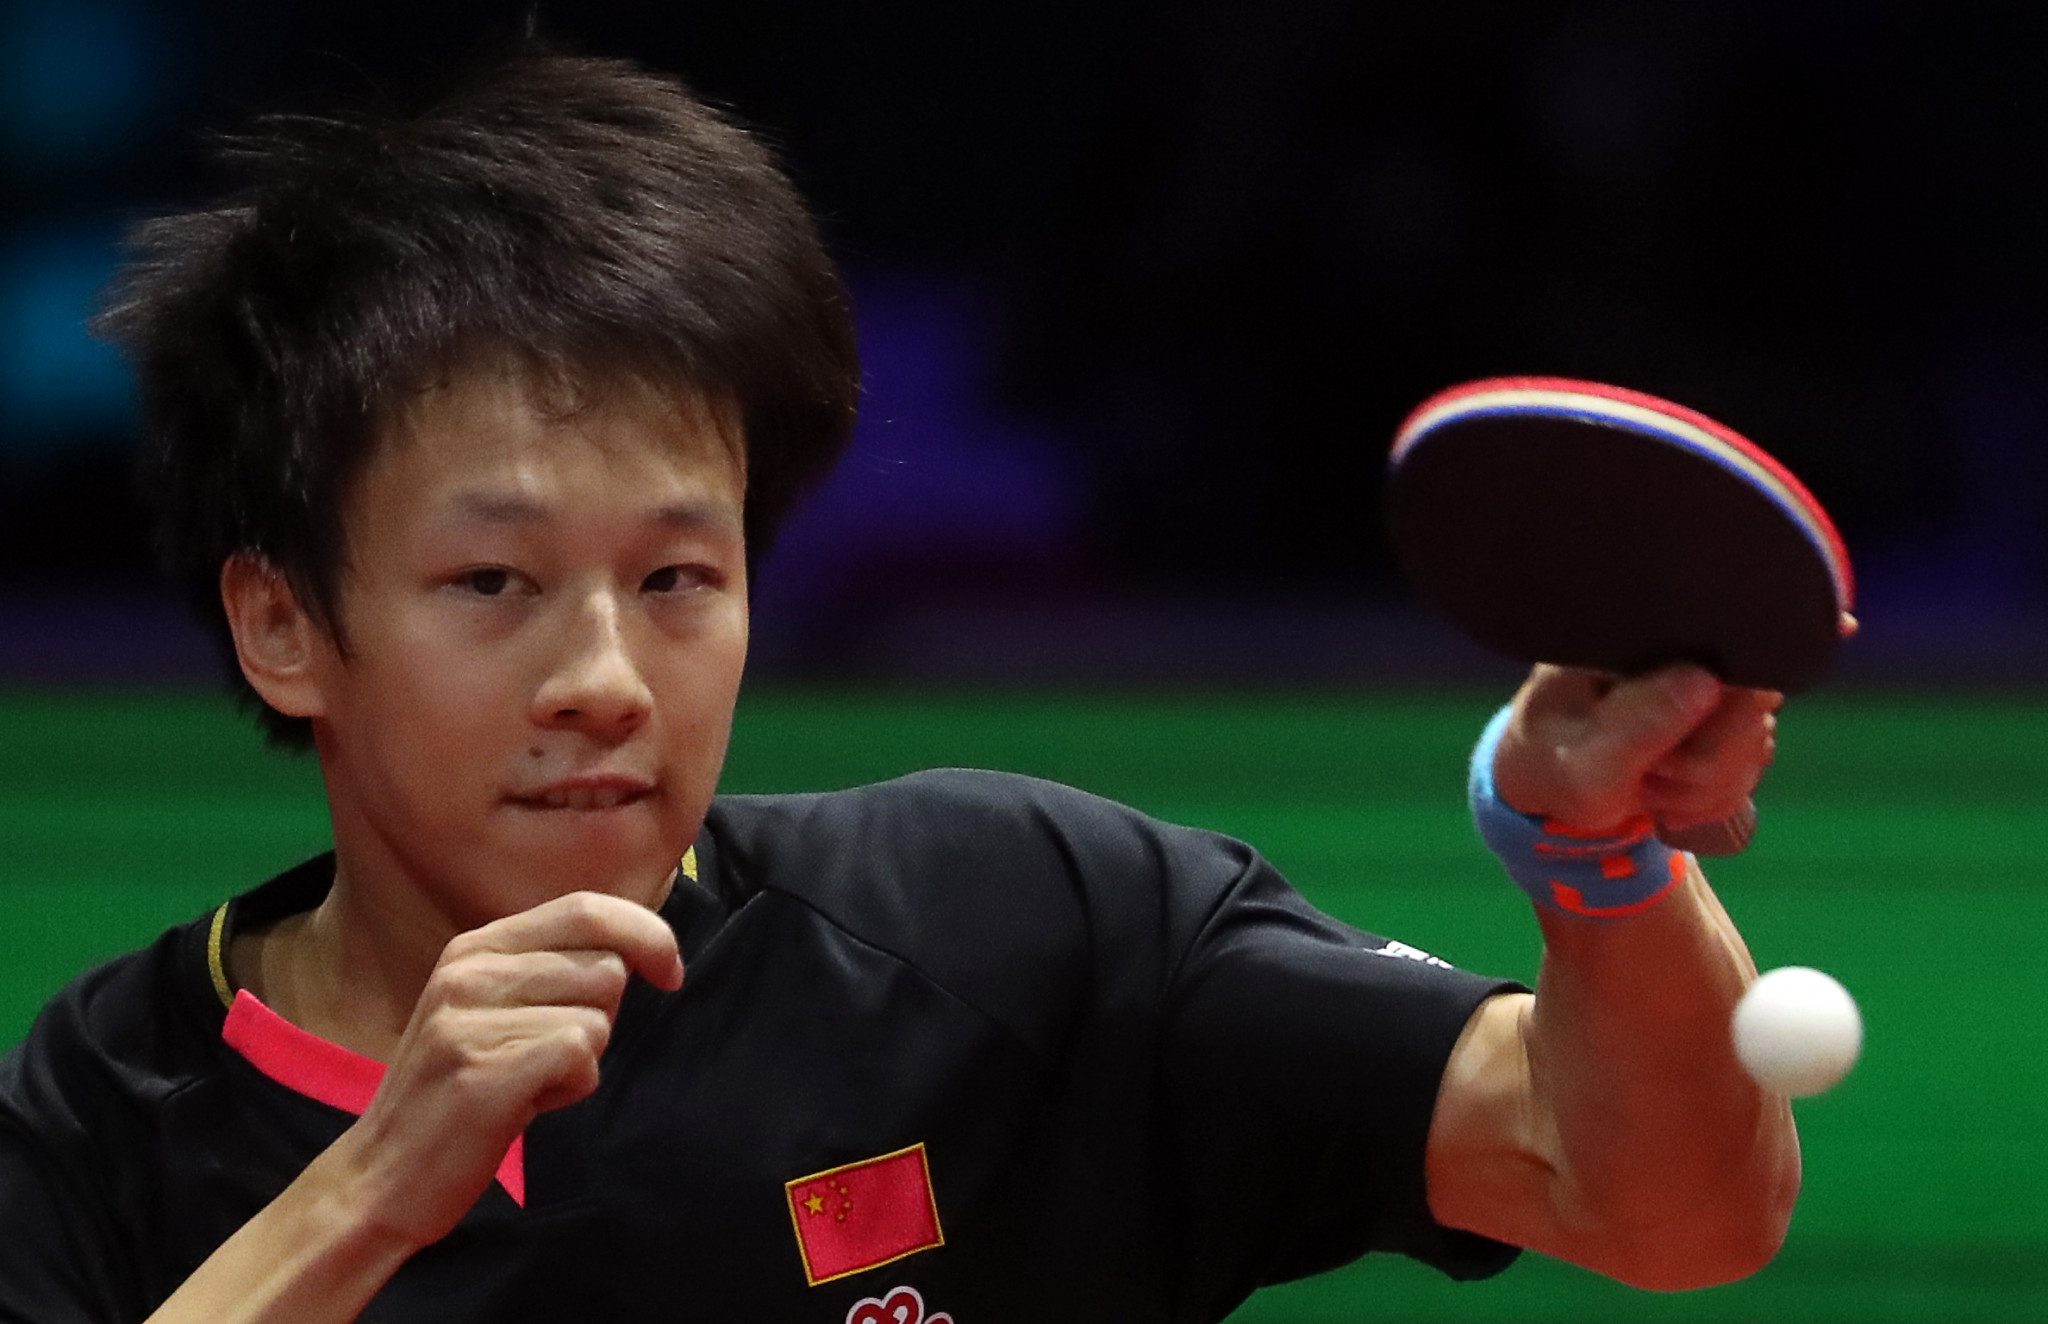 China's Lin Gaoyuan edged Germany's Dimitrij Ovtcharov in the quarter-finals of the  ITTF World Tour event in Stockholm ©Getty Images